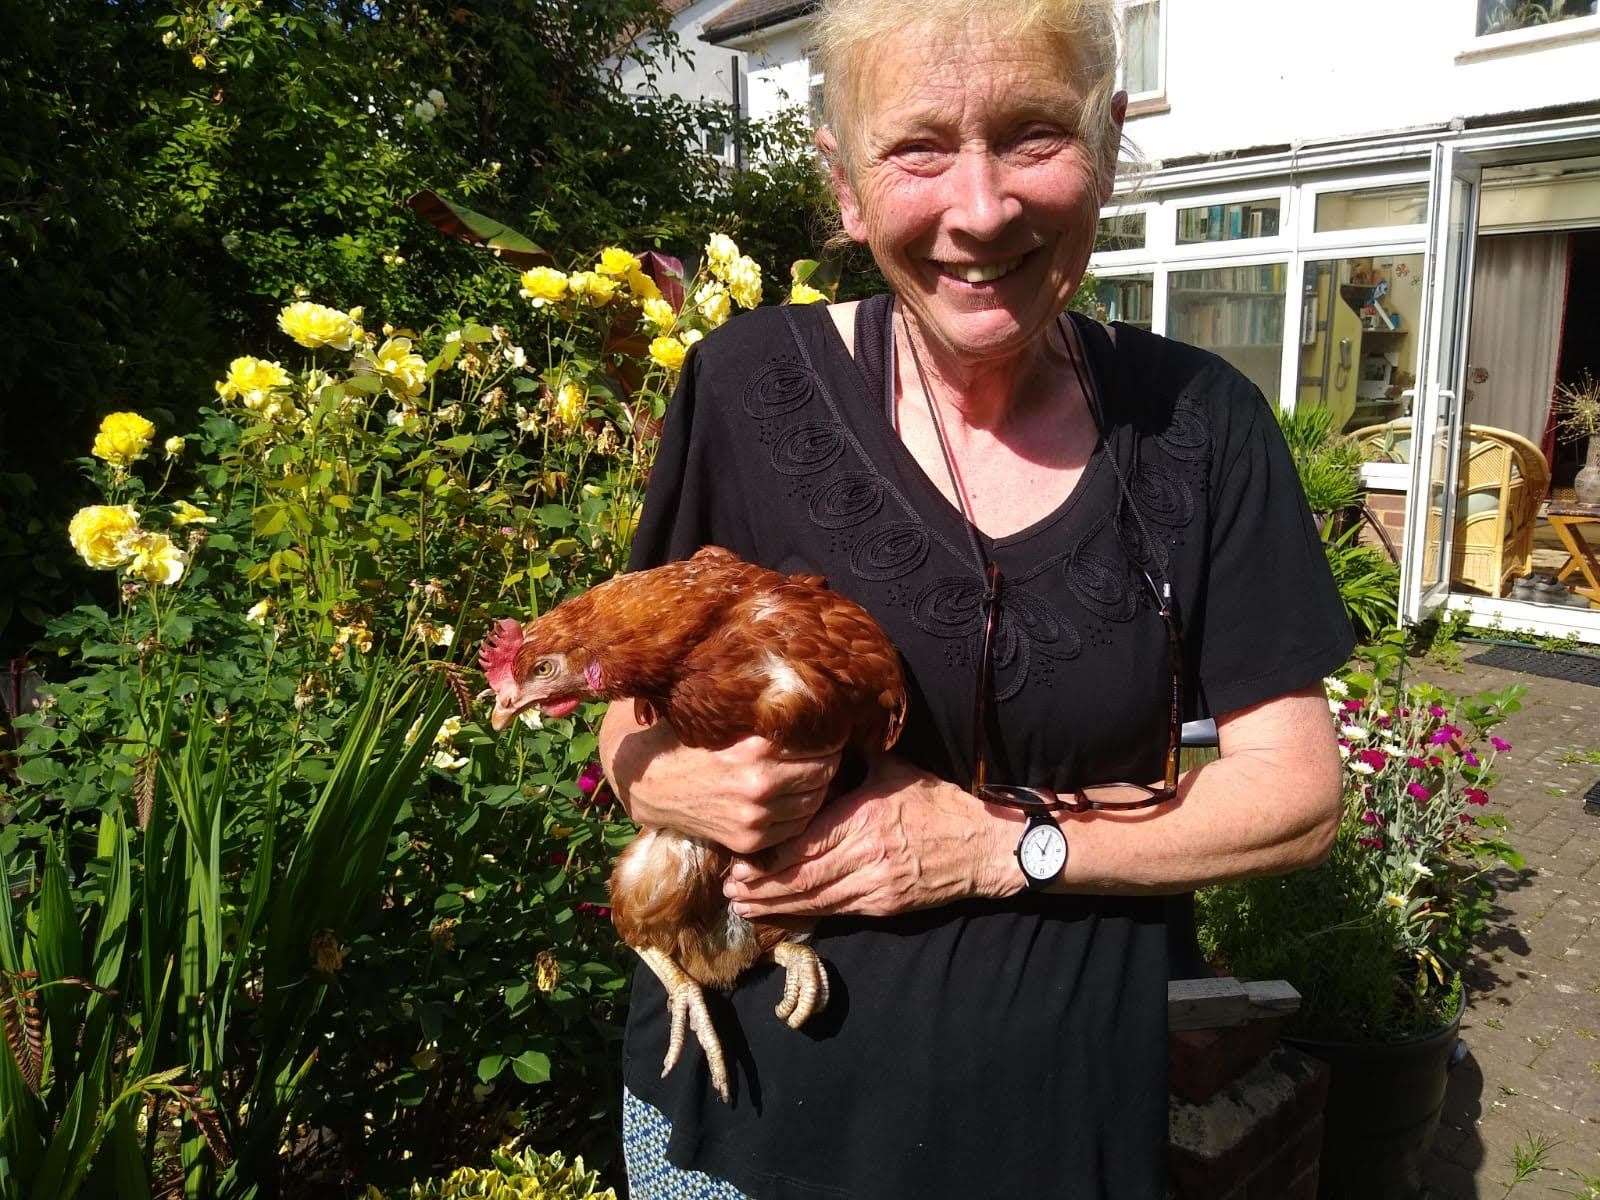 Henrietta is ‘particularly robust’ according to Hilary Carlen (RSPCA)